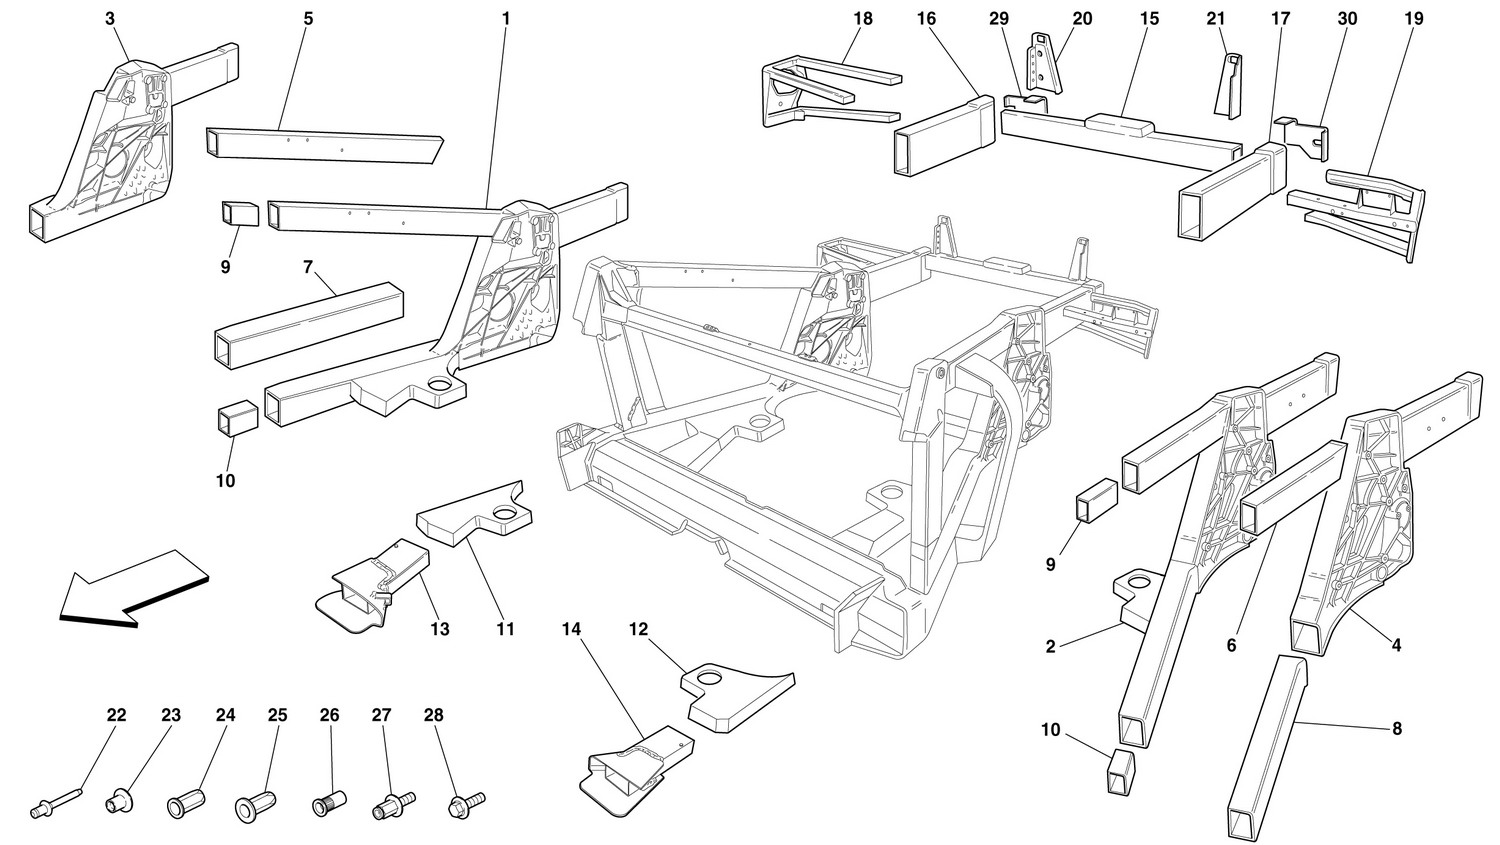 Schematic: Frame - Rear Elements Sub-Groups